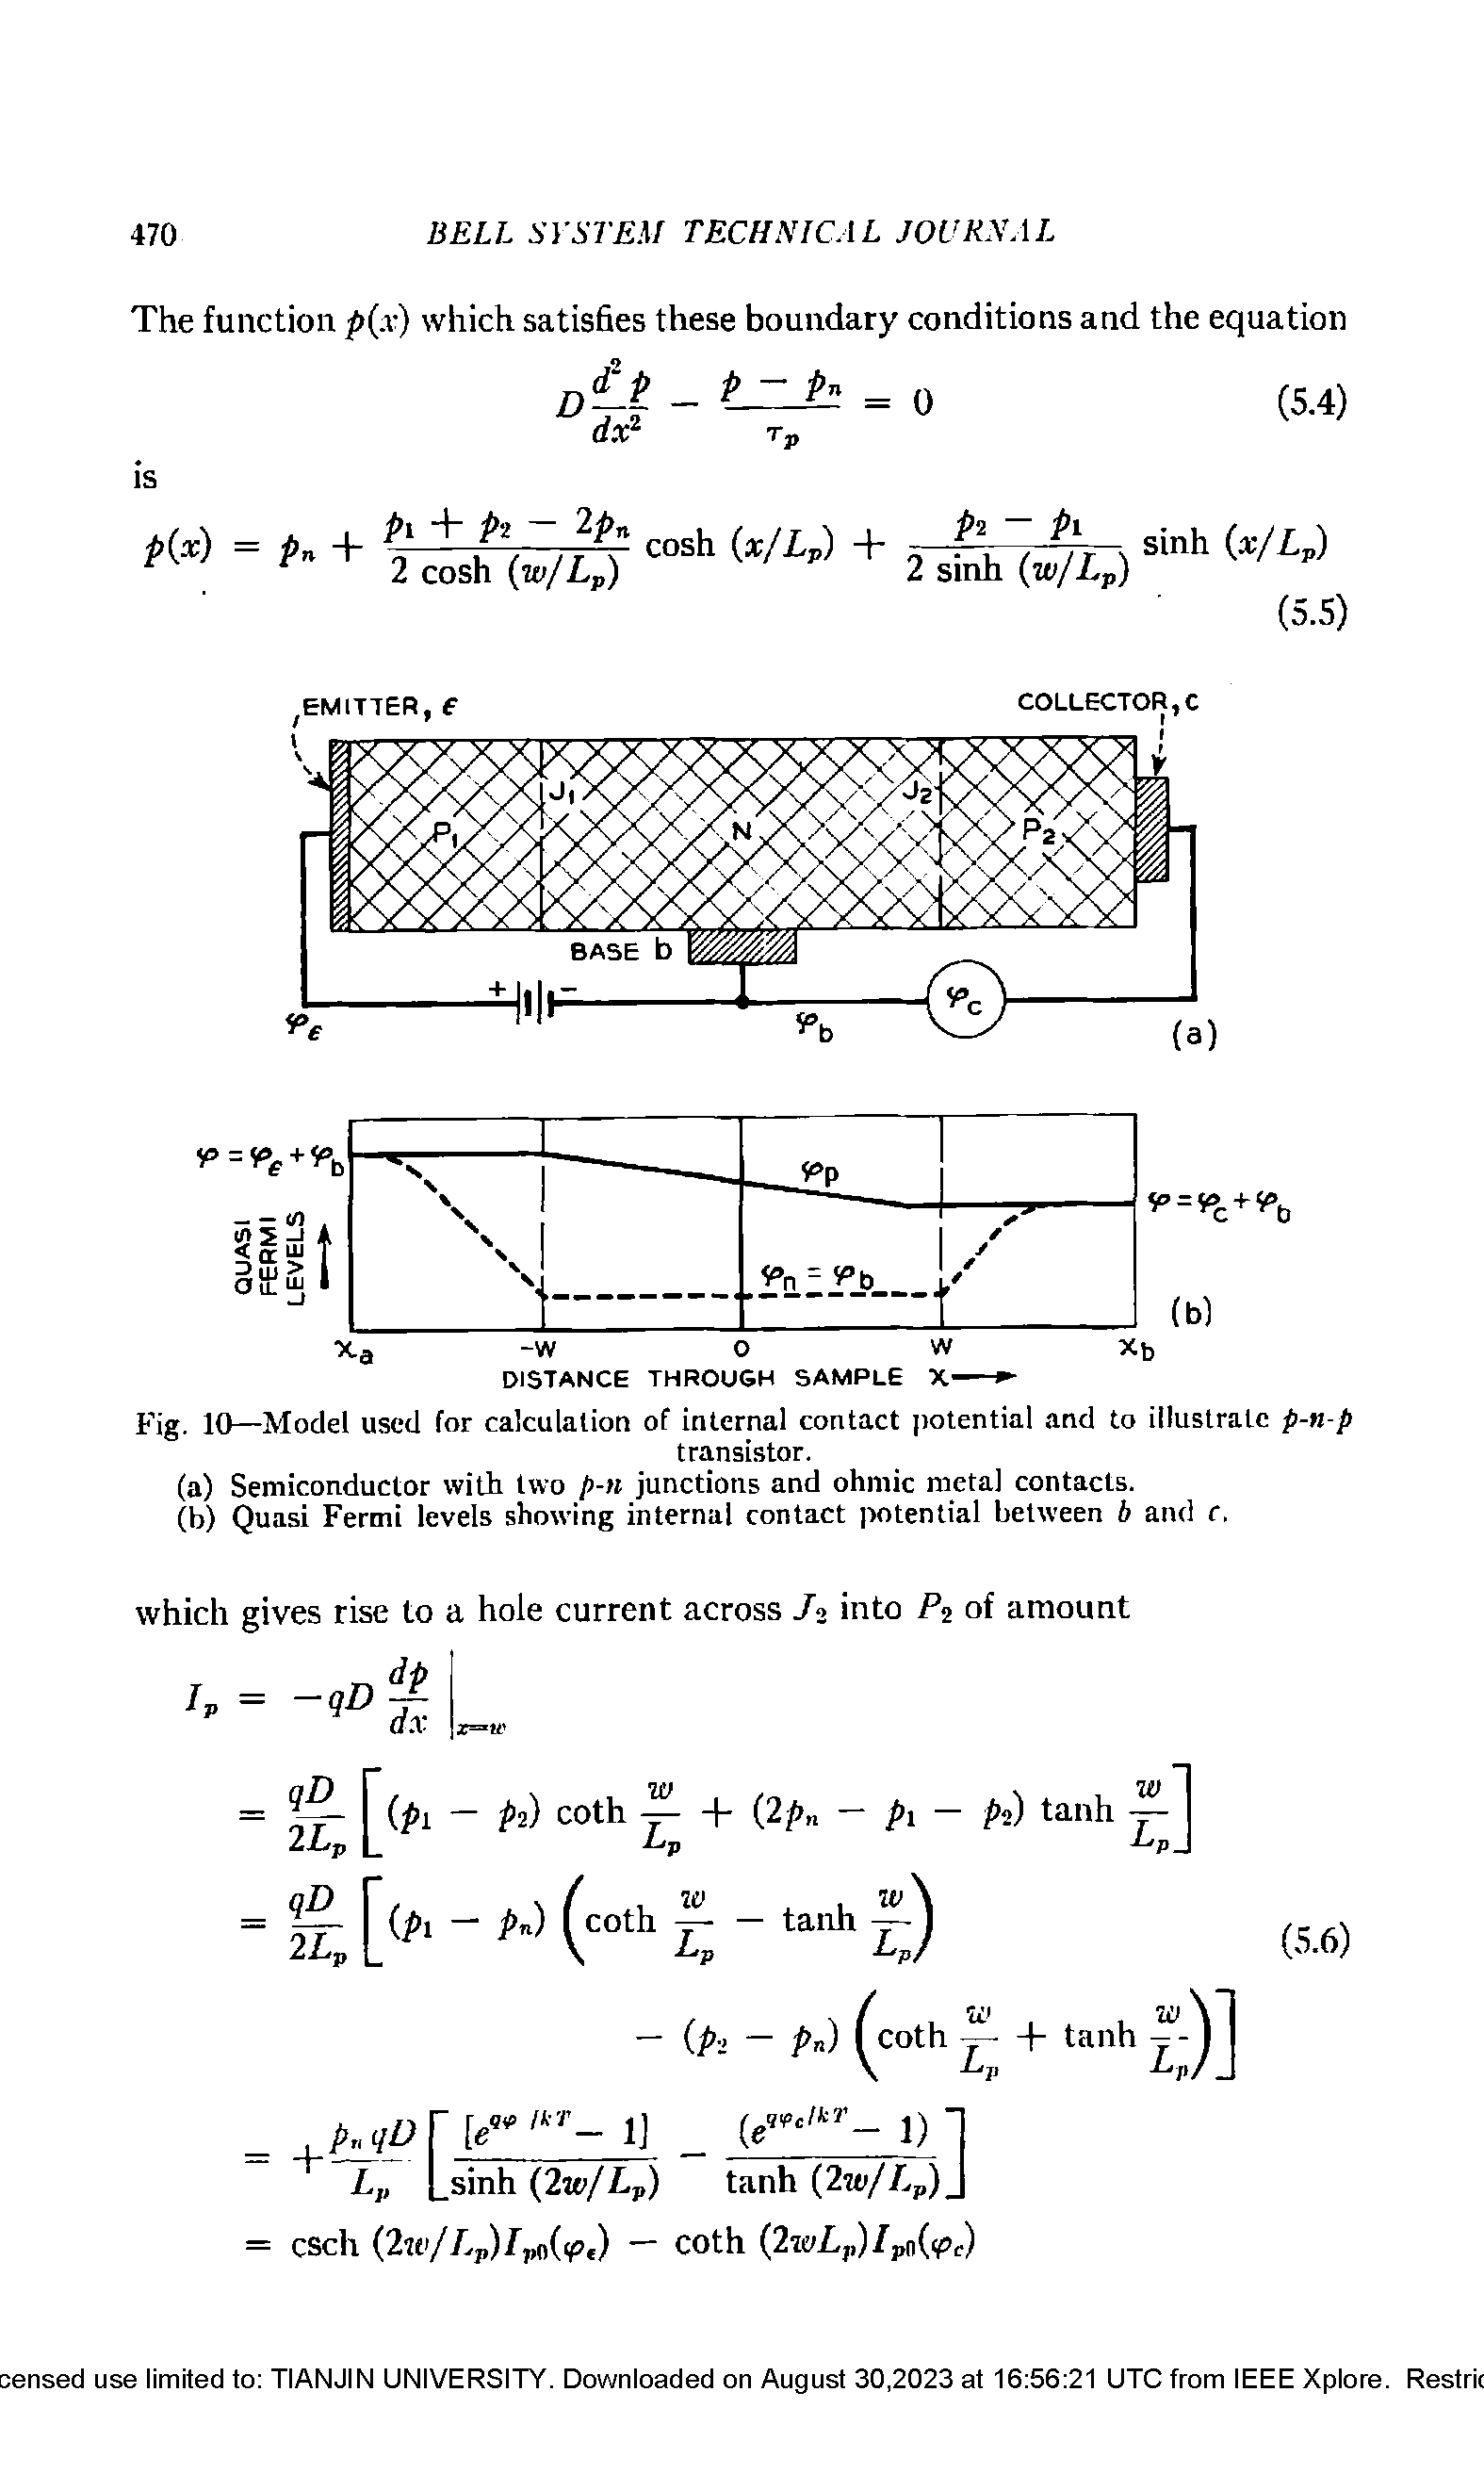 Shockley 1949 The theory of p-n junctions in semiconductors and p-n junction tra.png